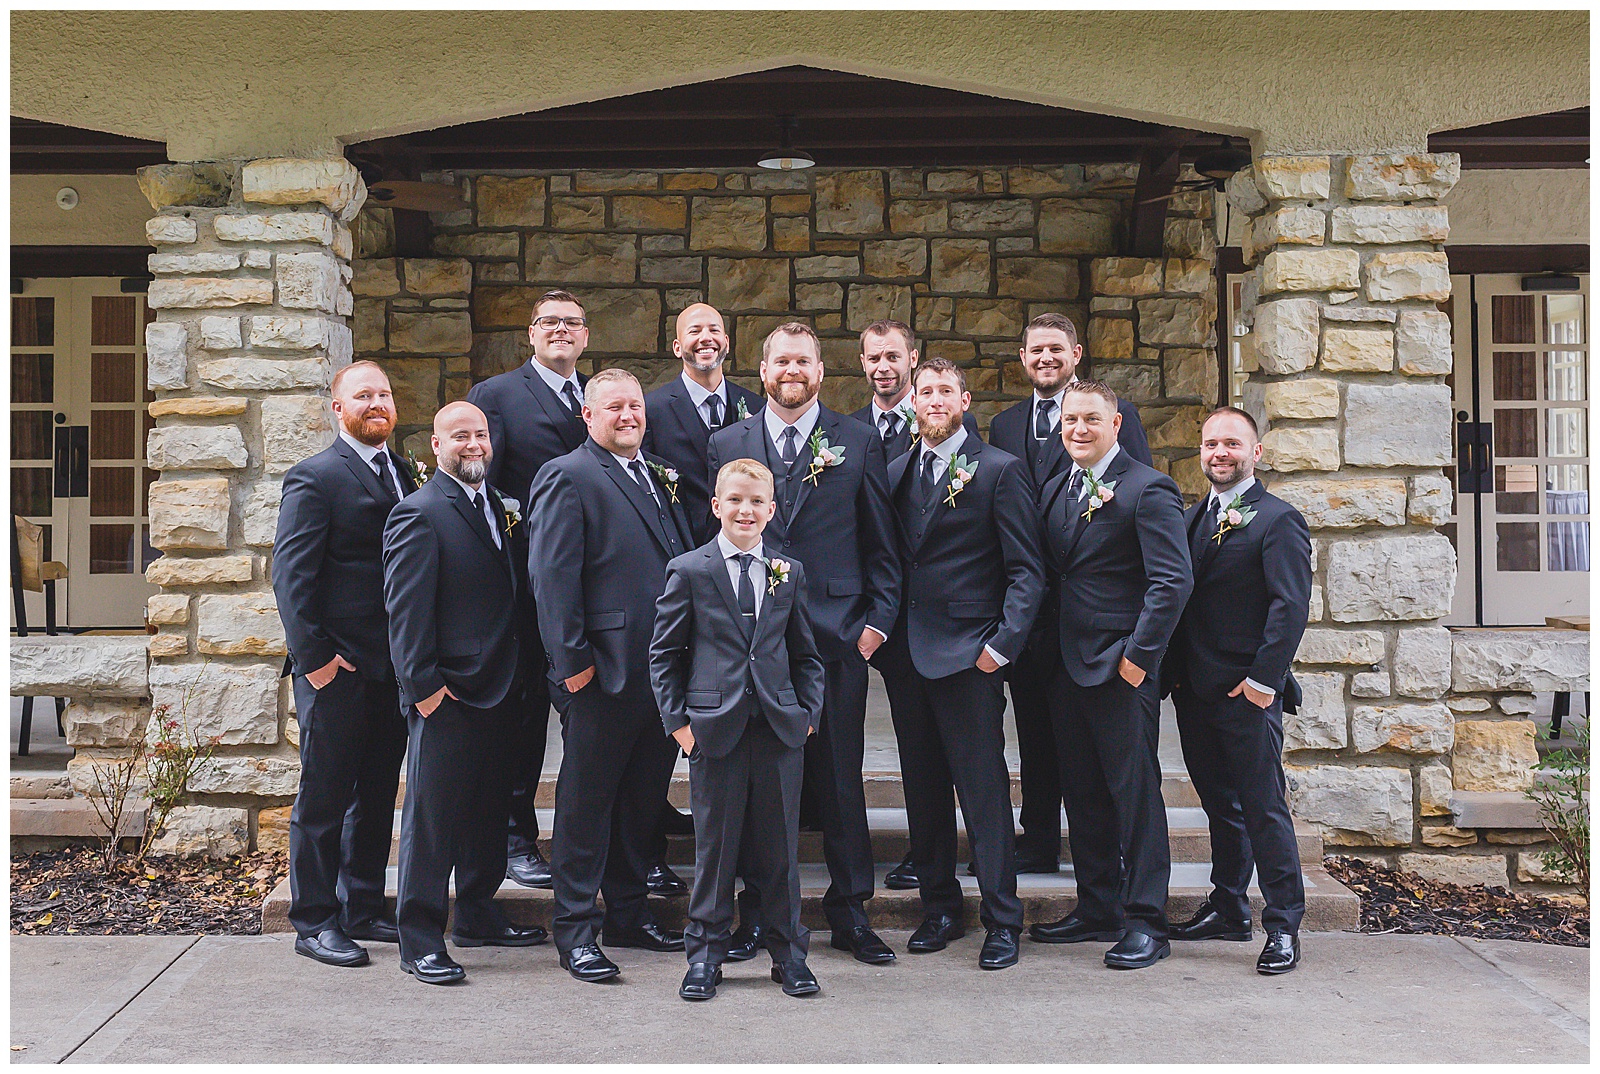 Wedding photography at The Elms Hotel & Spa in Excelsior Springs, Missouri, by Kansas City wedding photographers Wisdom-Watson Weddings.